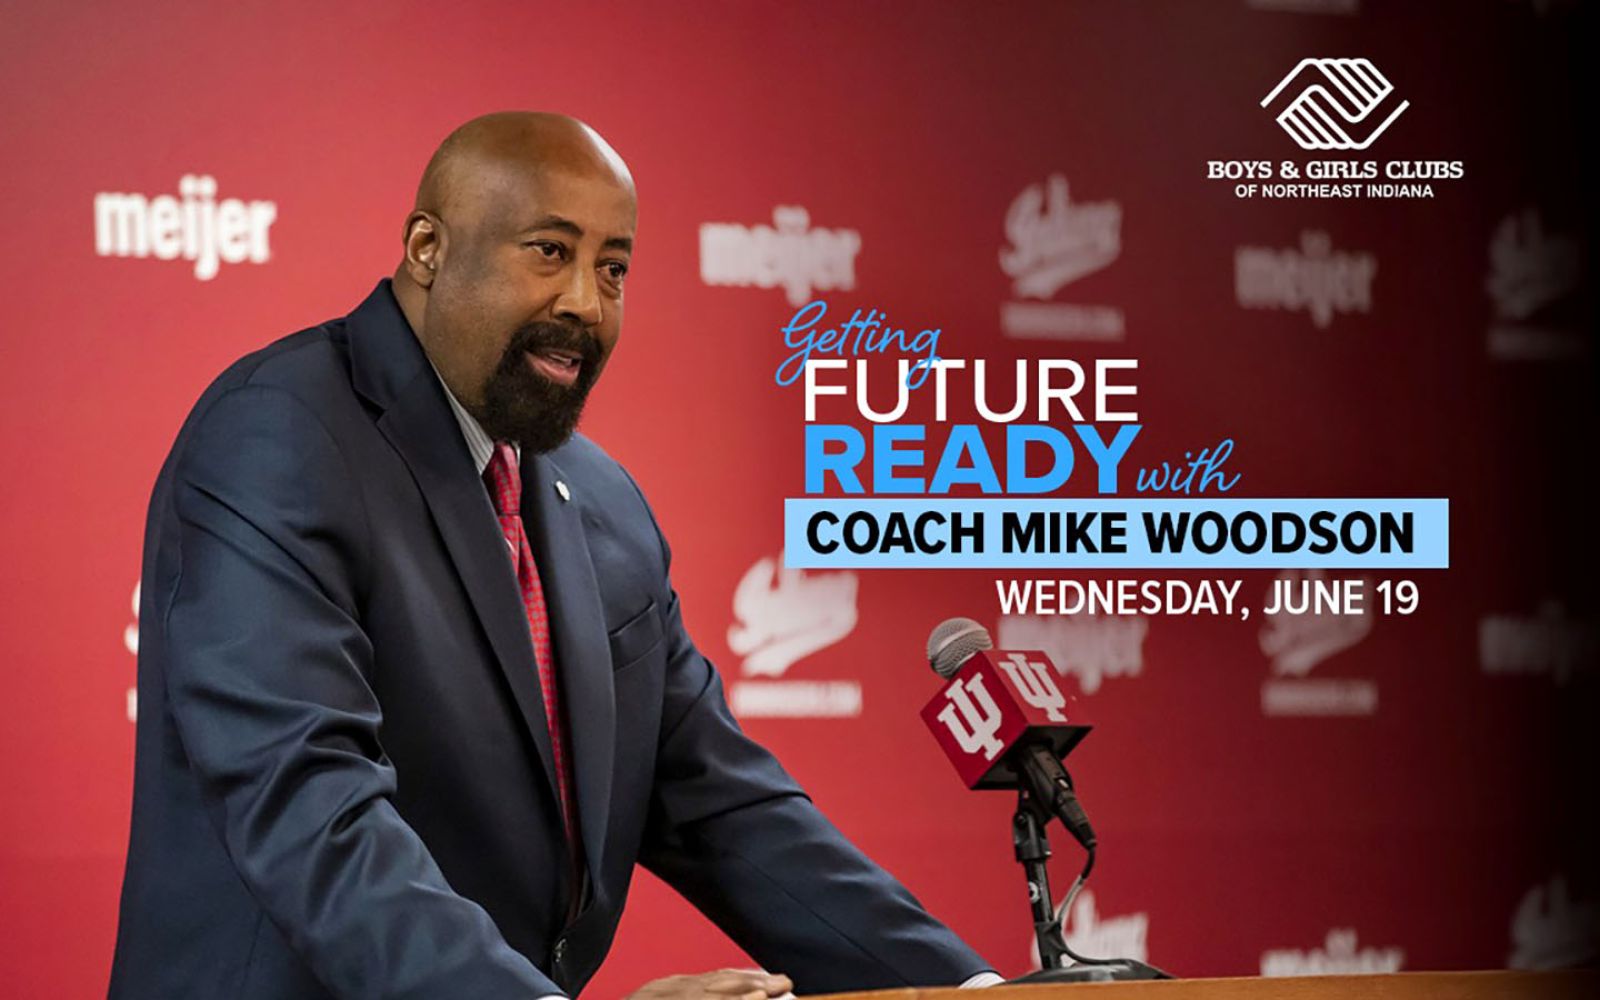 IU coach Mike Woodson will be at a Boys & Girls Clubs of Fort Wayne event on Wednesday, June 19, at The Clyde Theatre.